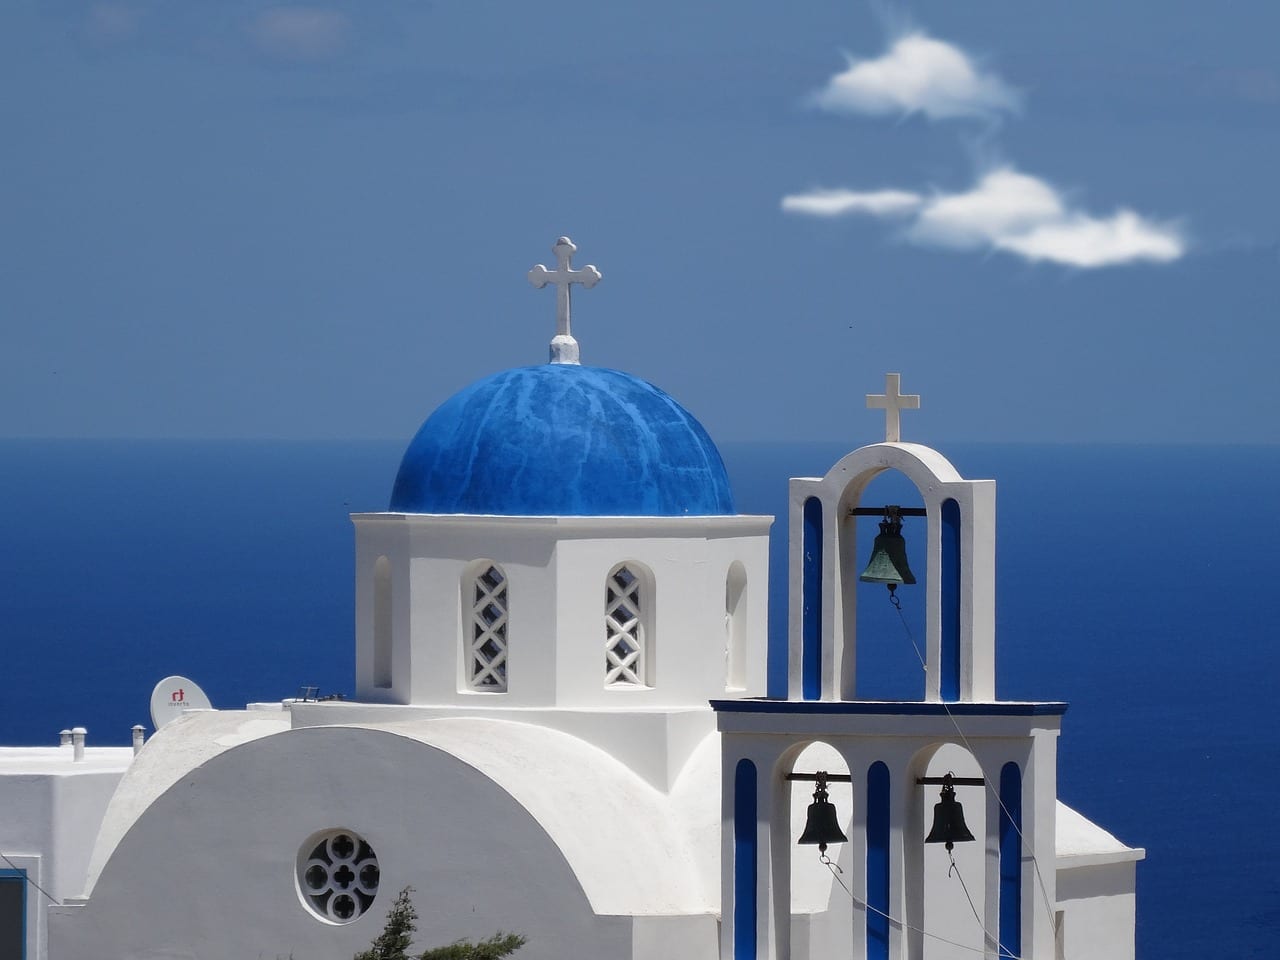 Looking for things to do in Santorini? These Santorini tours ideas are a great place to start!